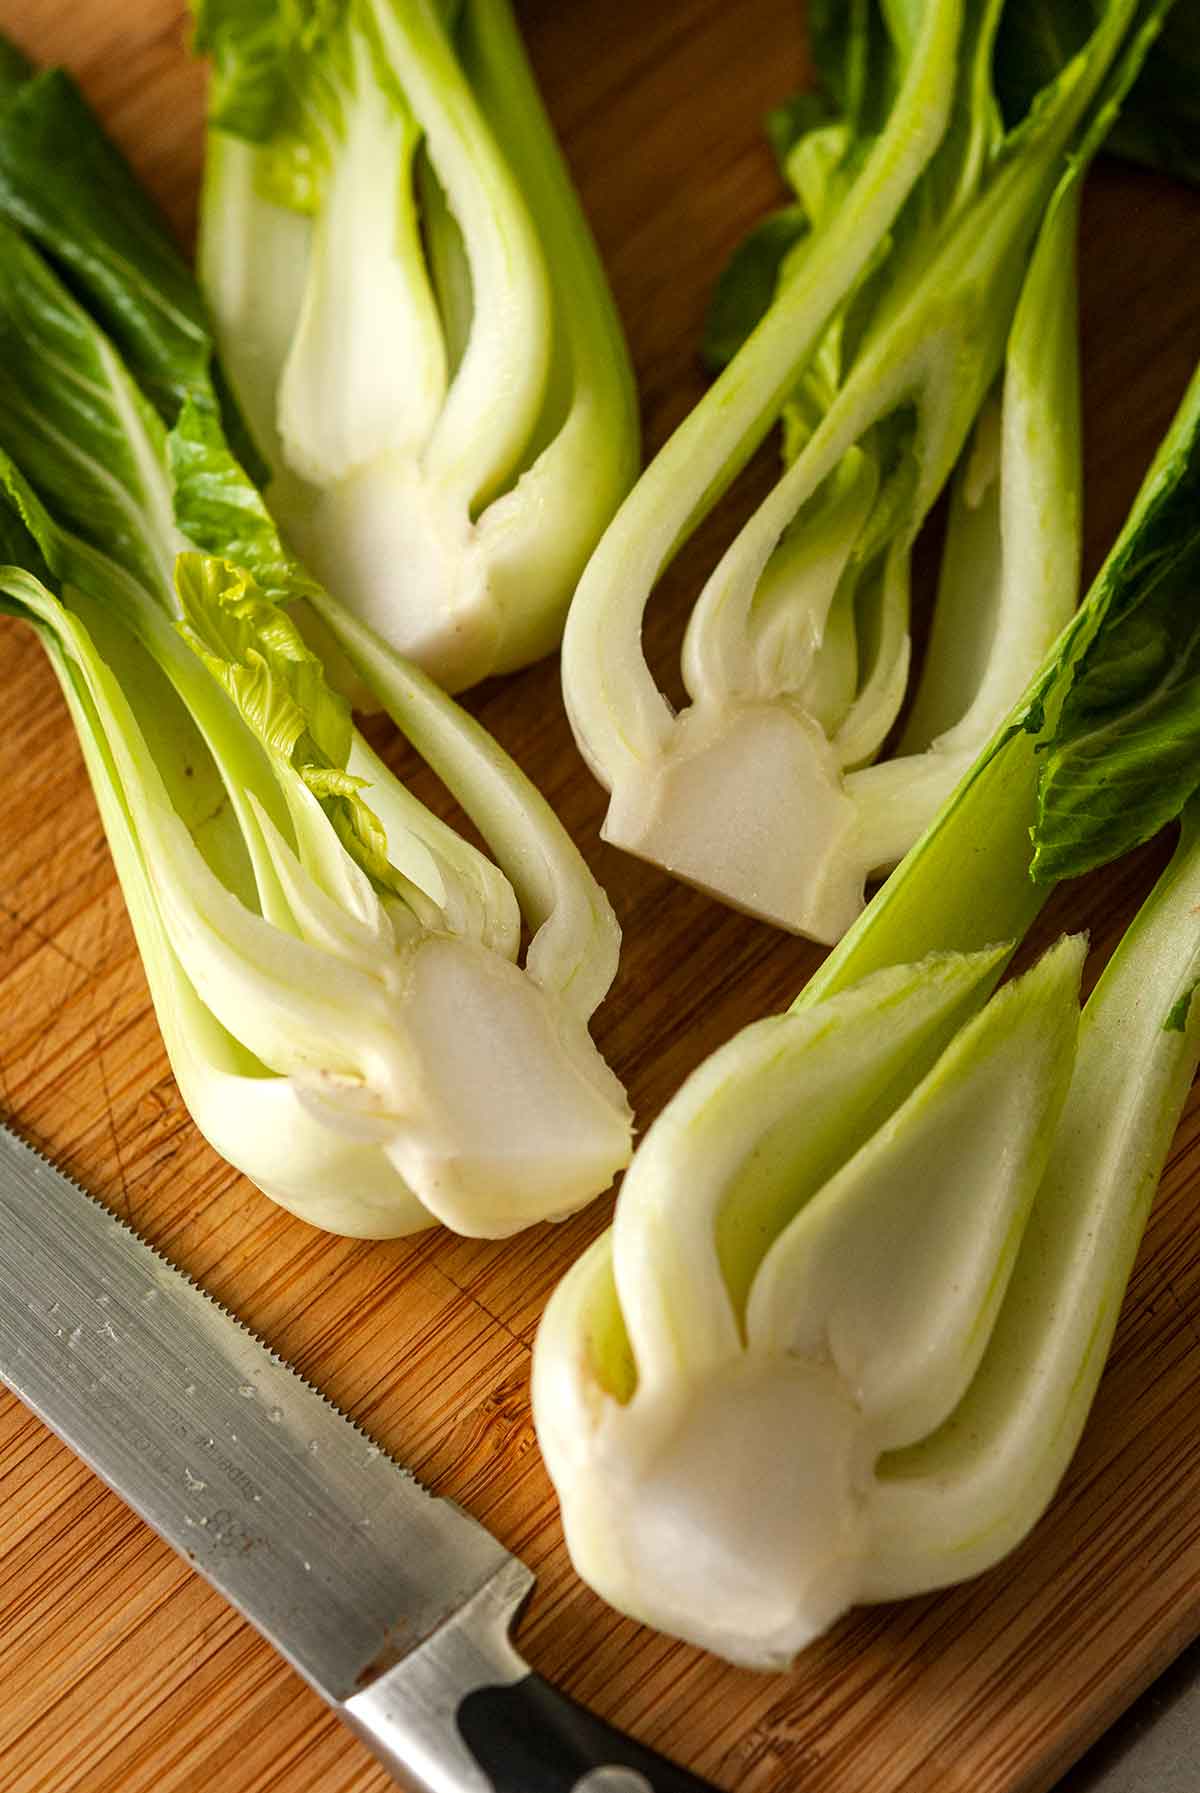 4 slices of baby bok choy on a cutting board.